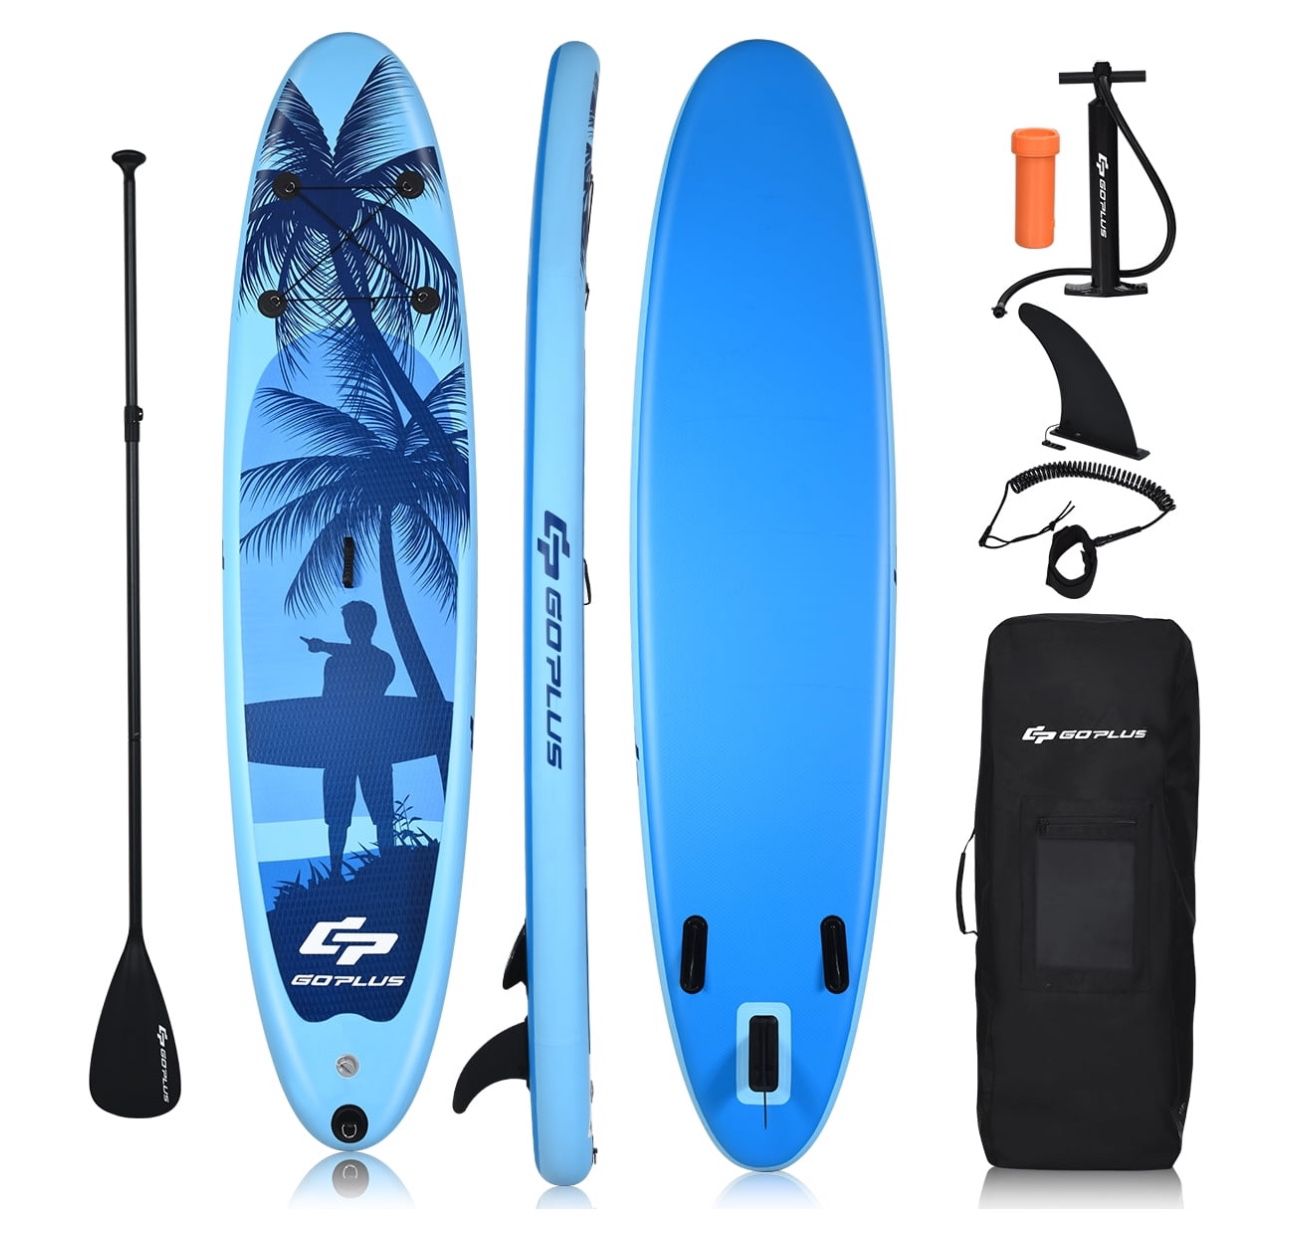 10' Inflatable Stand Up Paddle Board (SUP)